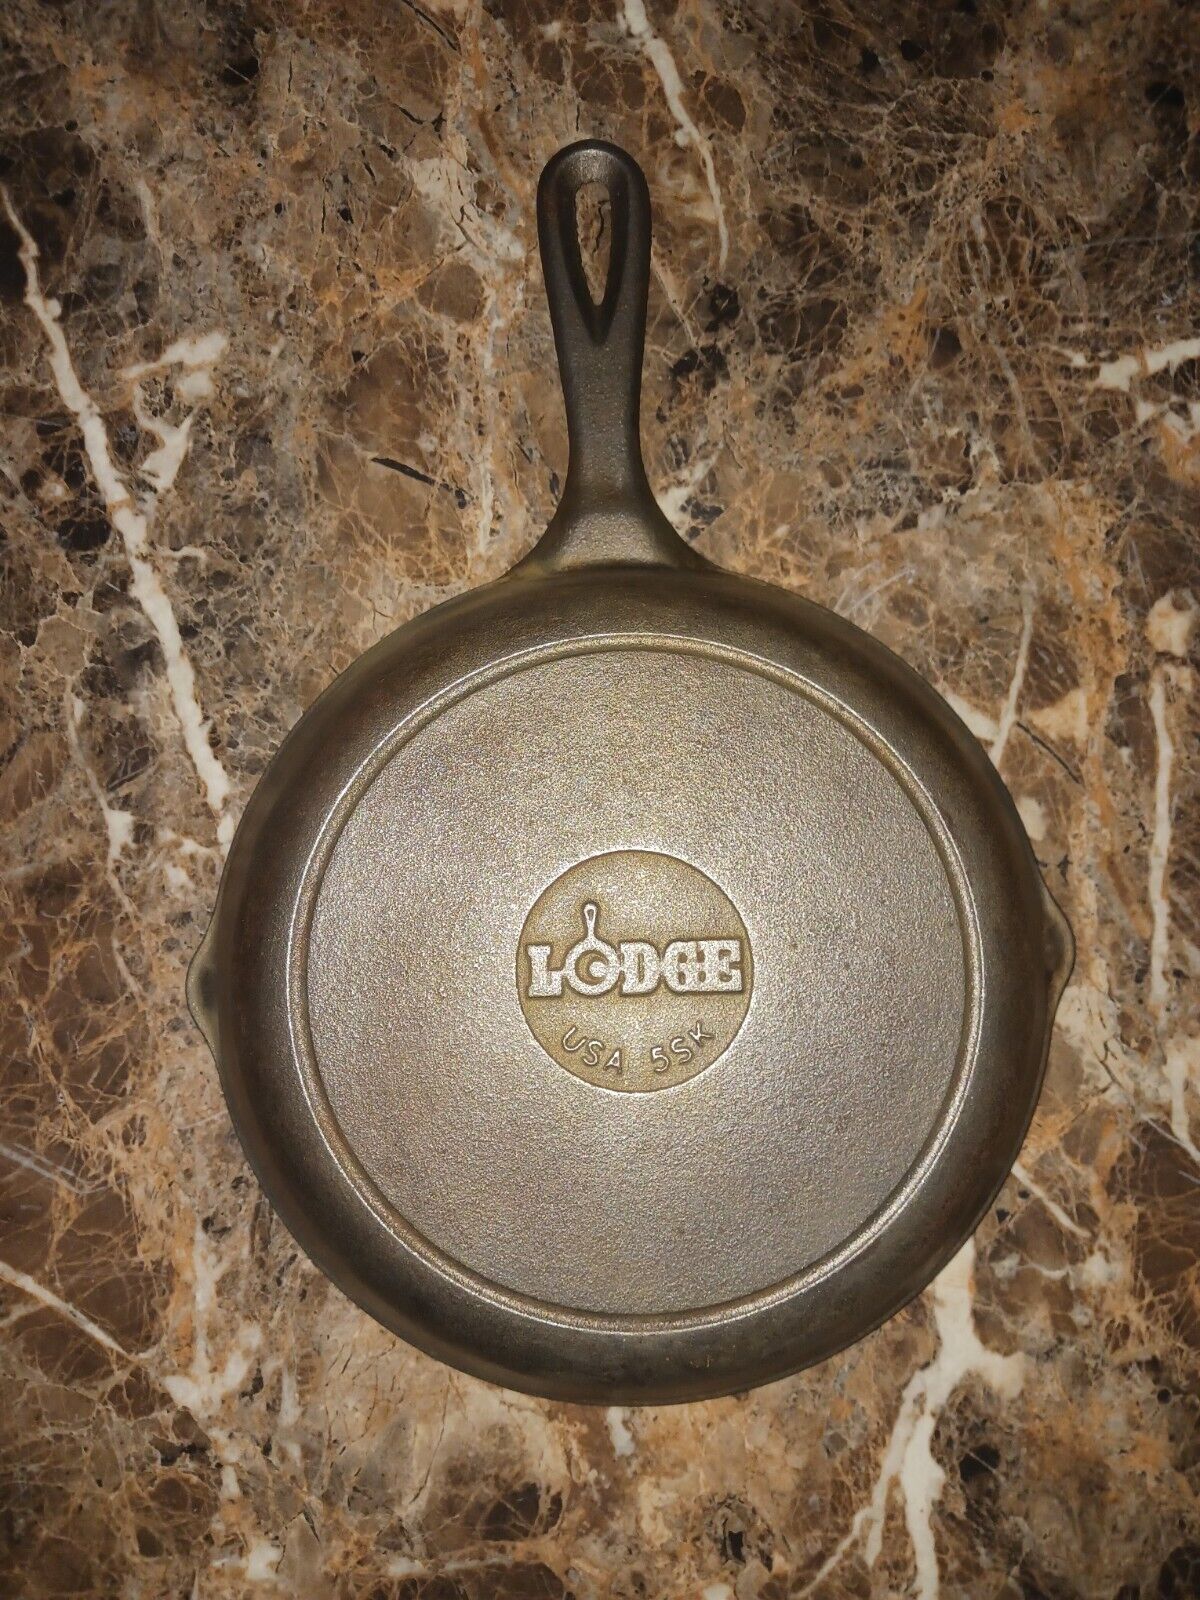 Lodge Cast Iron Skillet Double Spout 5SK--8 3/4 Inches Across